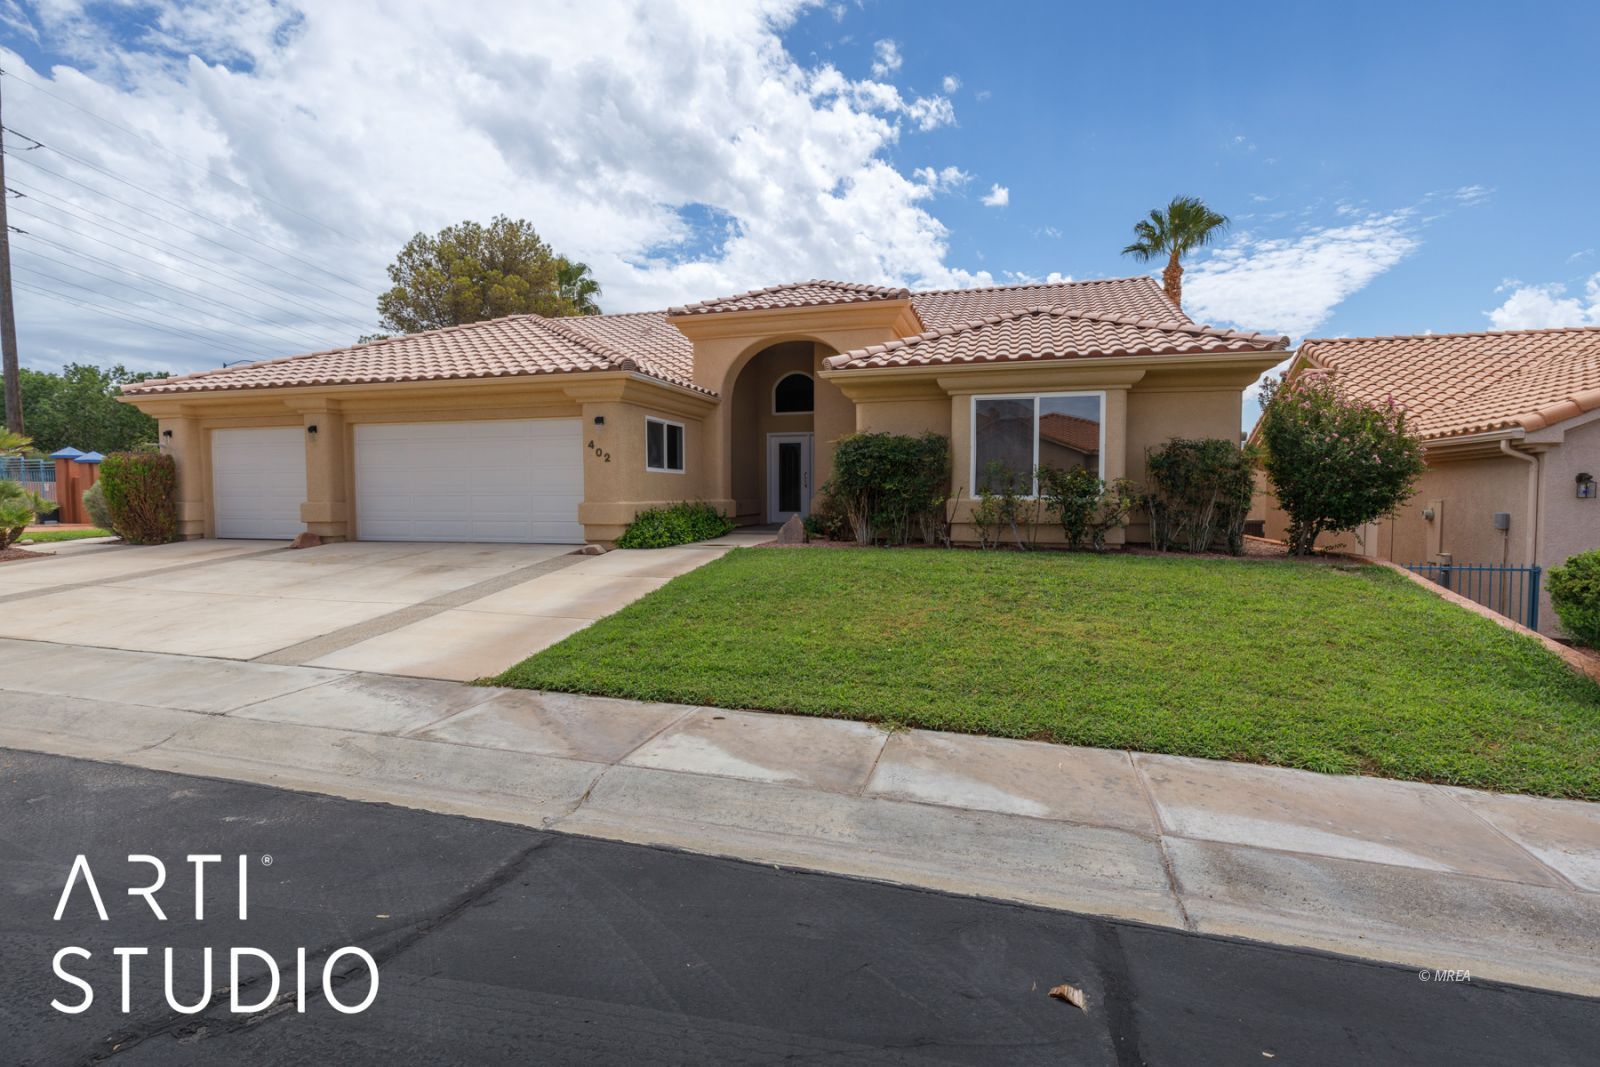 402 Crystal Canyon Dr, Mesquite NV 89027